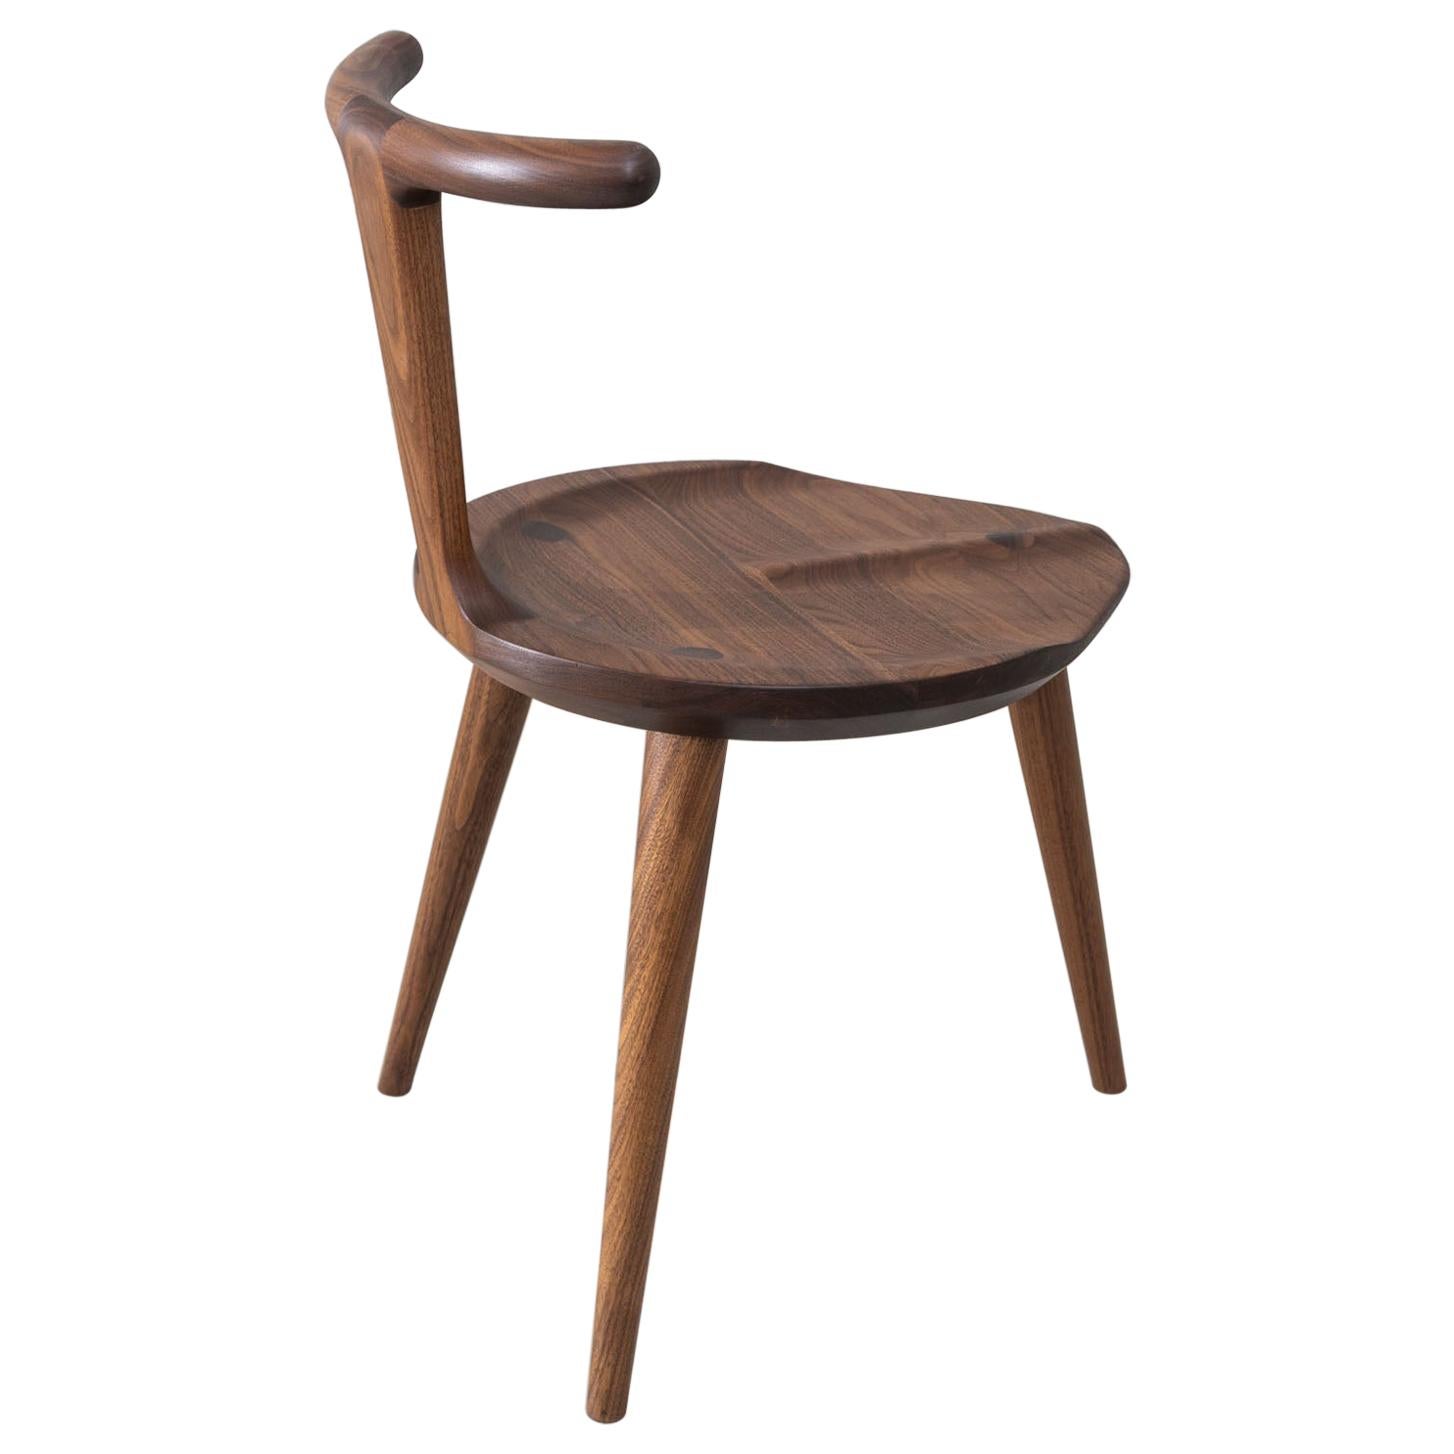 Oxbend Chair 3 Legs, Dining Seat in Walnut Wood by Fernweh Woodworking